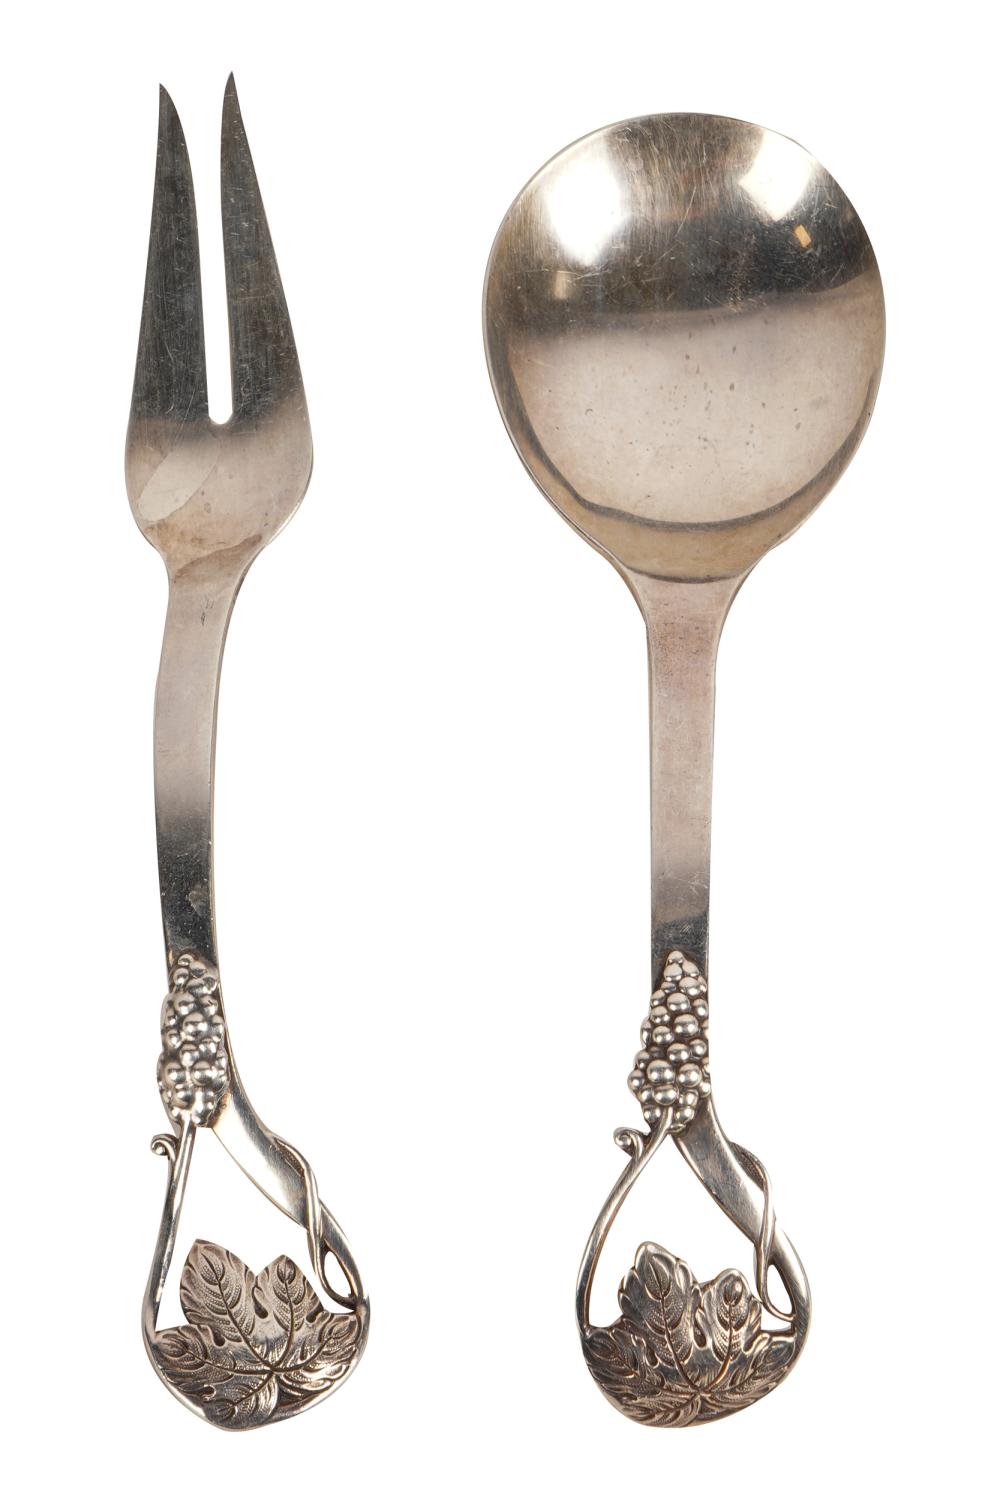 WHITING STERLING TWO PART SERVING 3326de